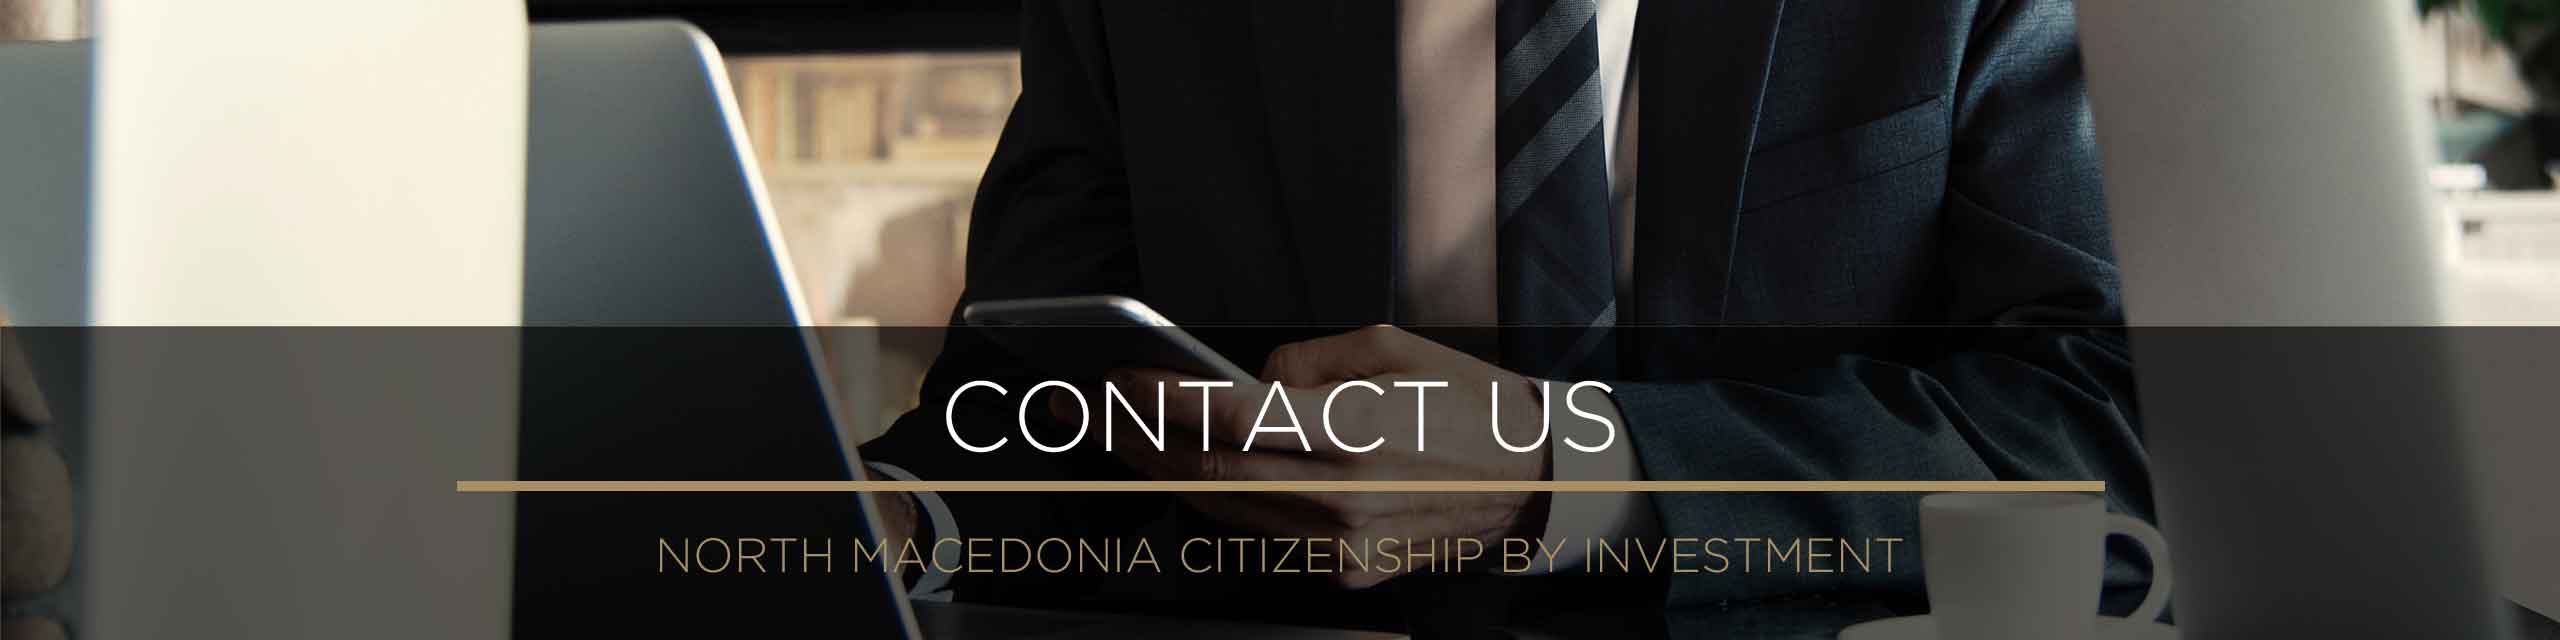 Contact Details of GCI - Global Citizenship Investment